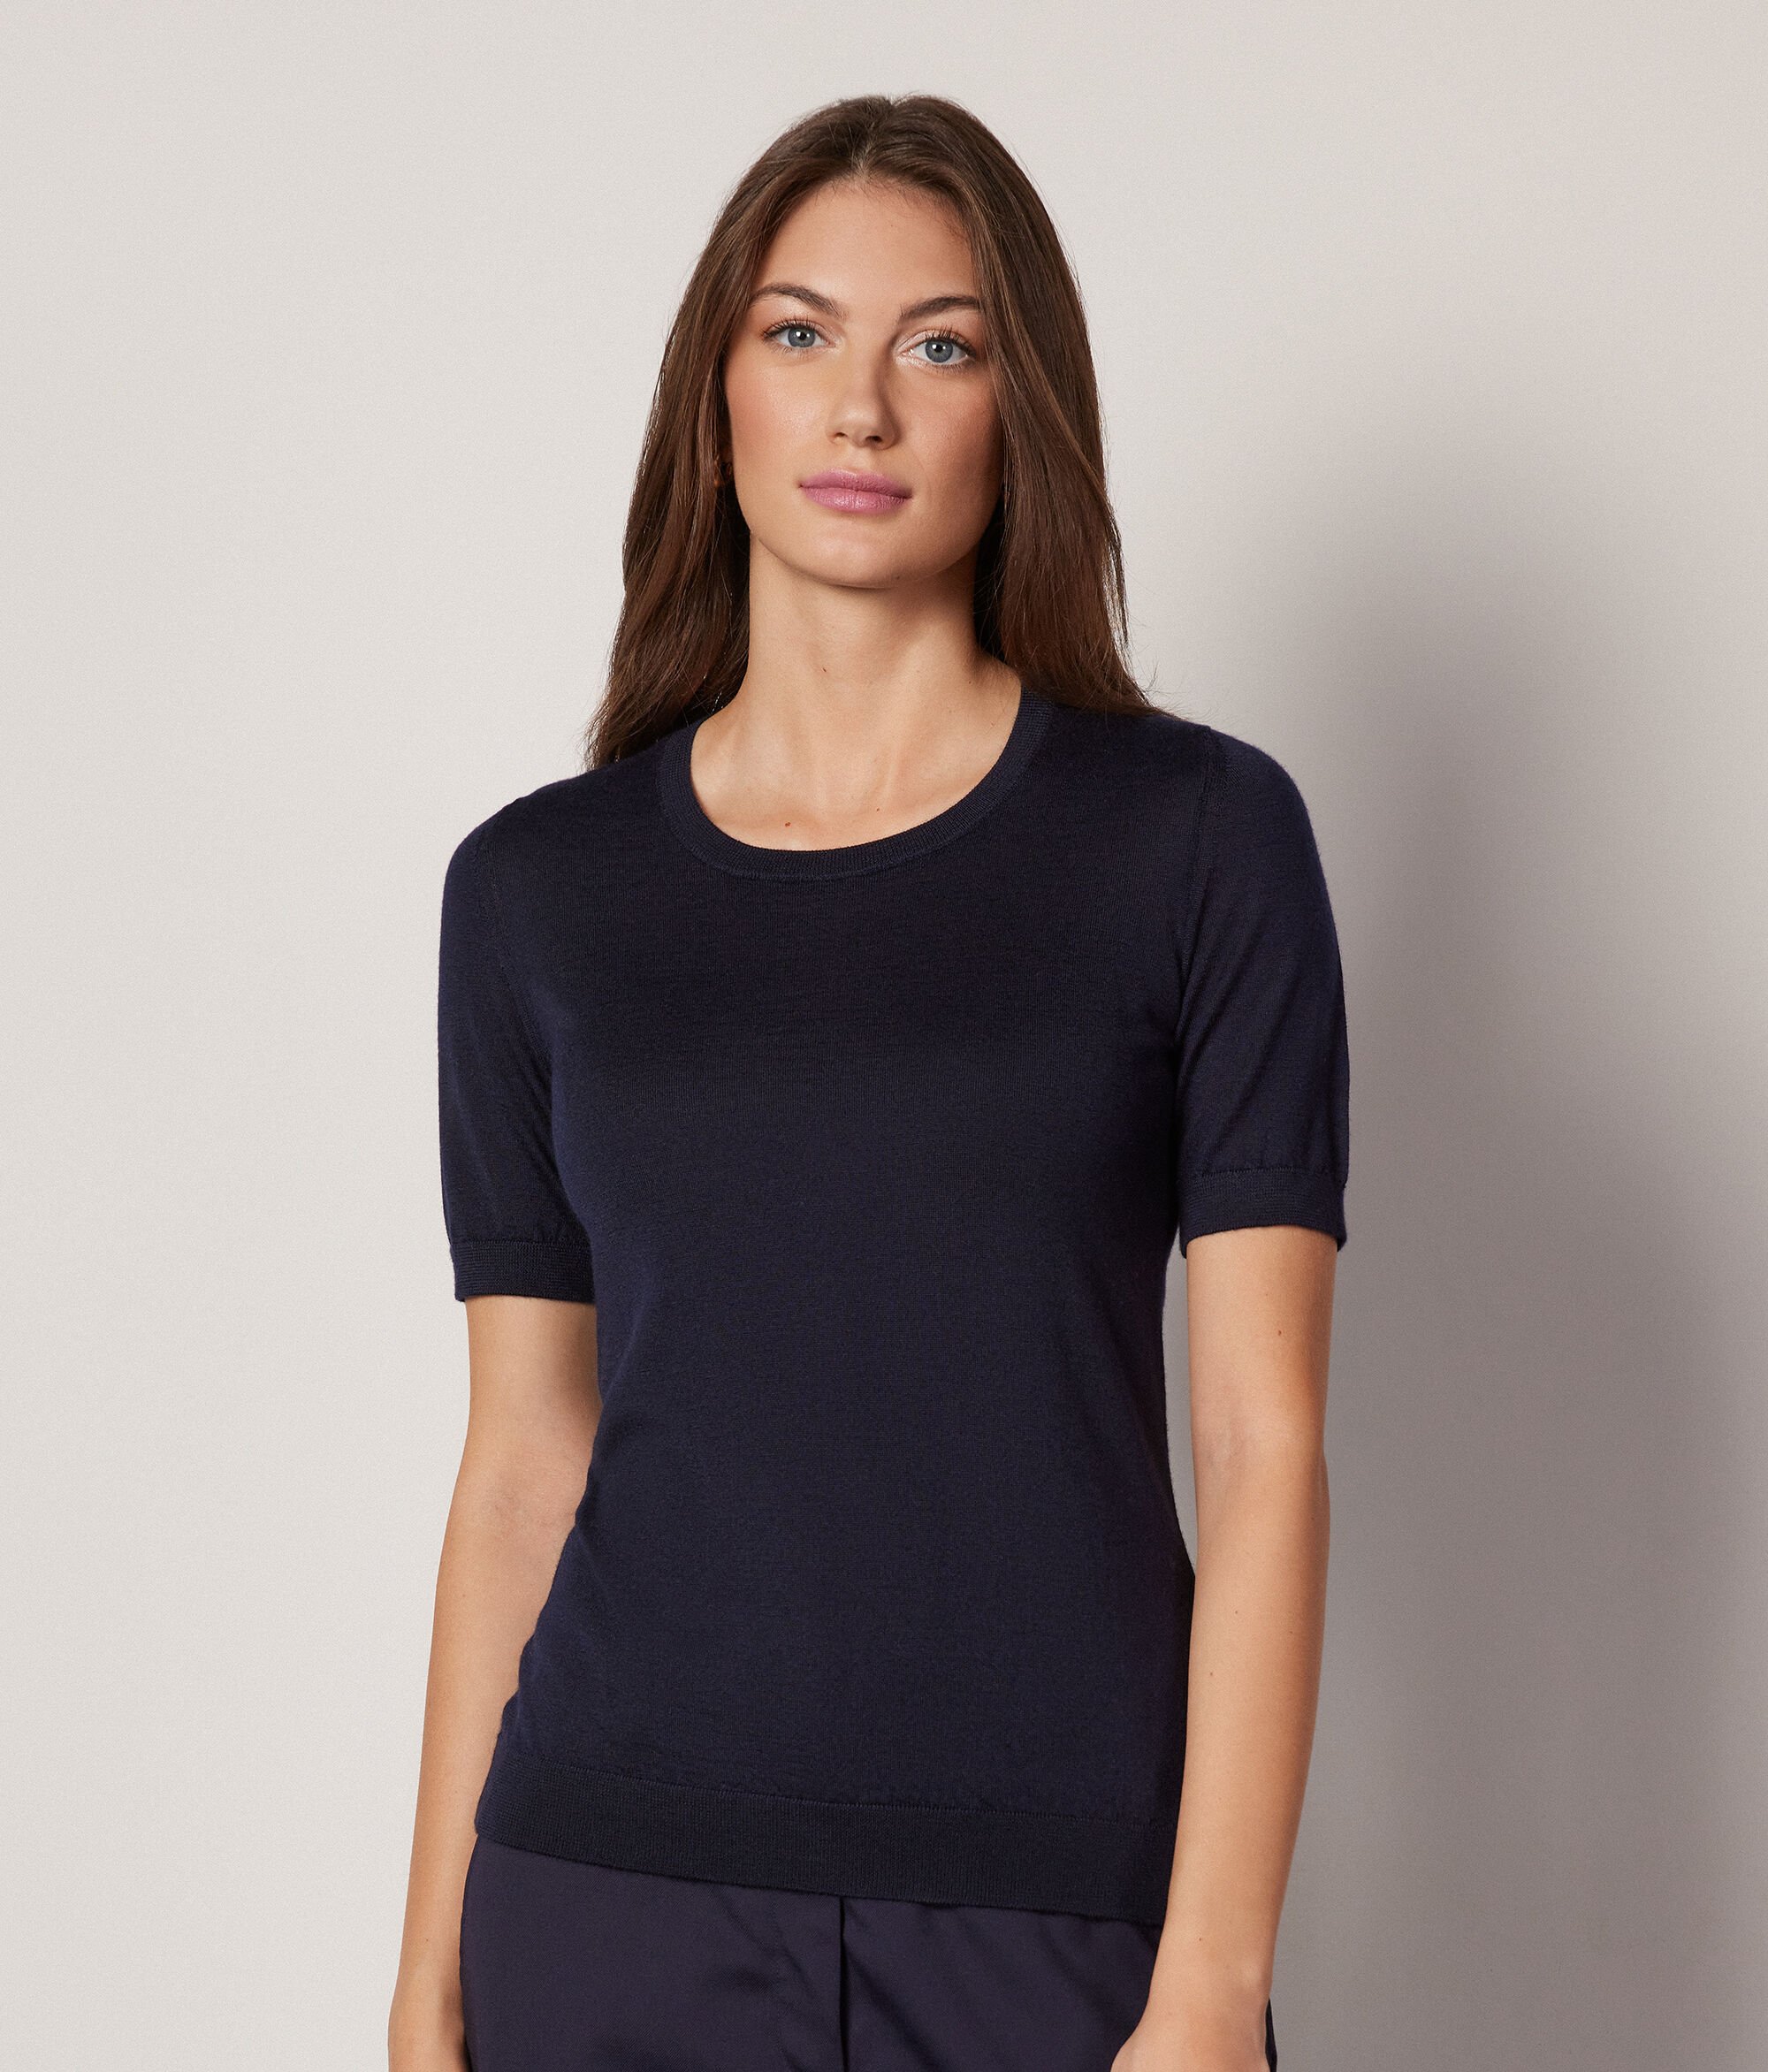 Ultrafine Cashmere Crewneck Sweater with Short Sleeves